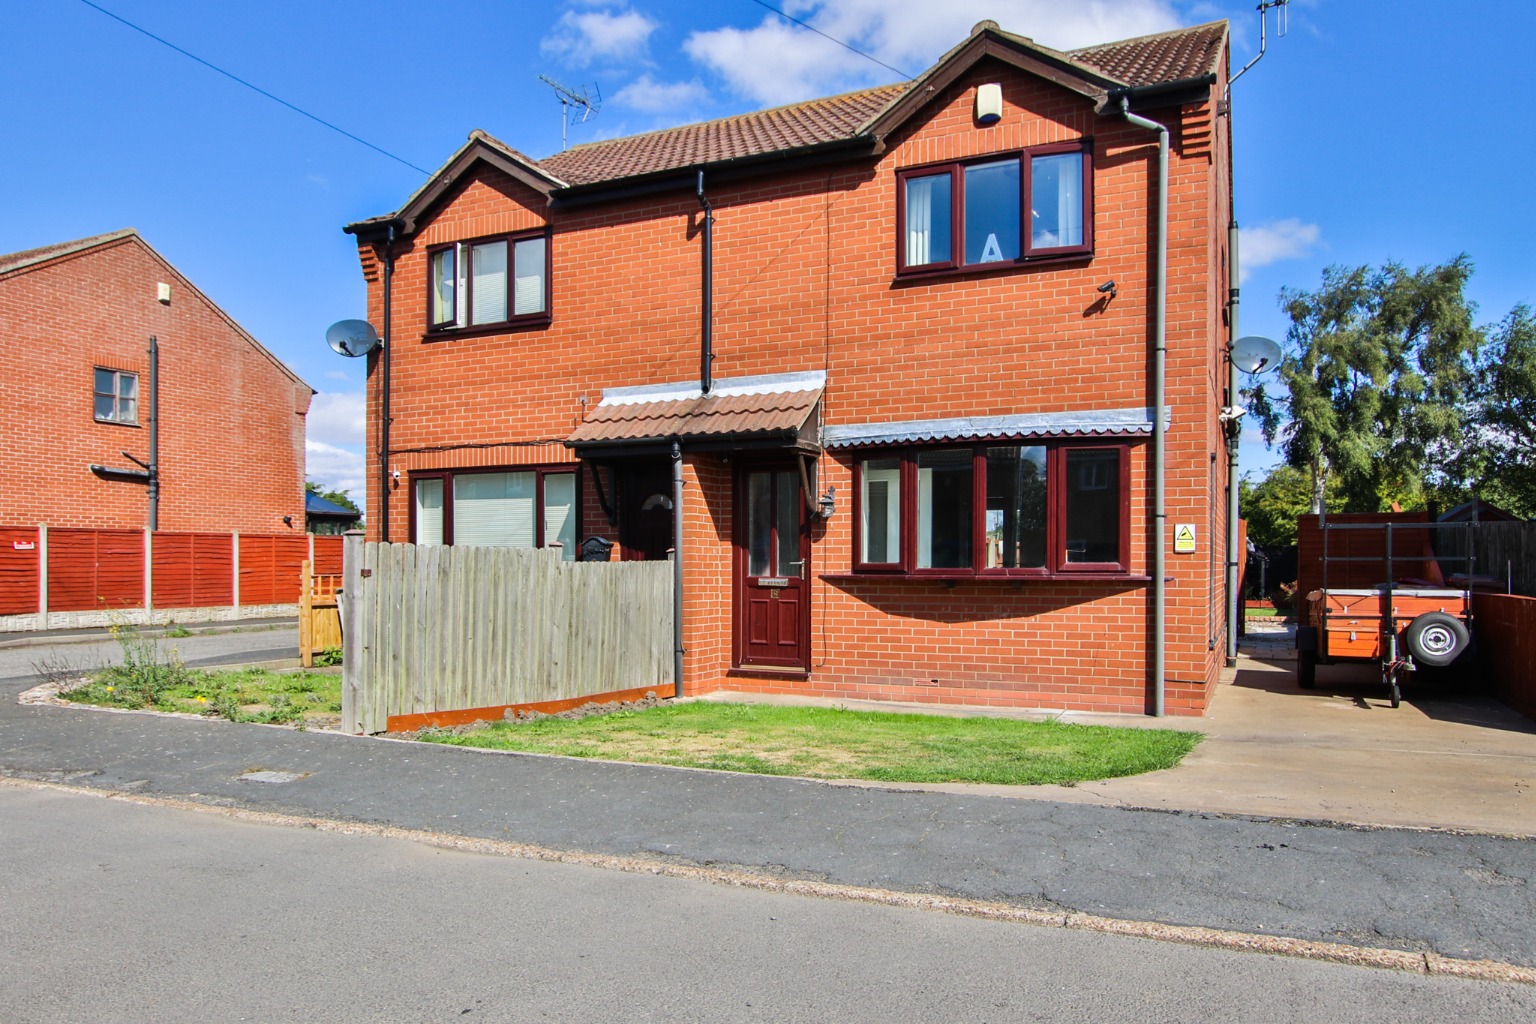 3 bed semi-detached house for sale in Oxmarsh Lane, Barrow-Upon-Humber, DN19